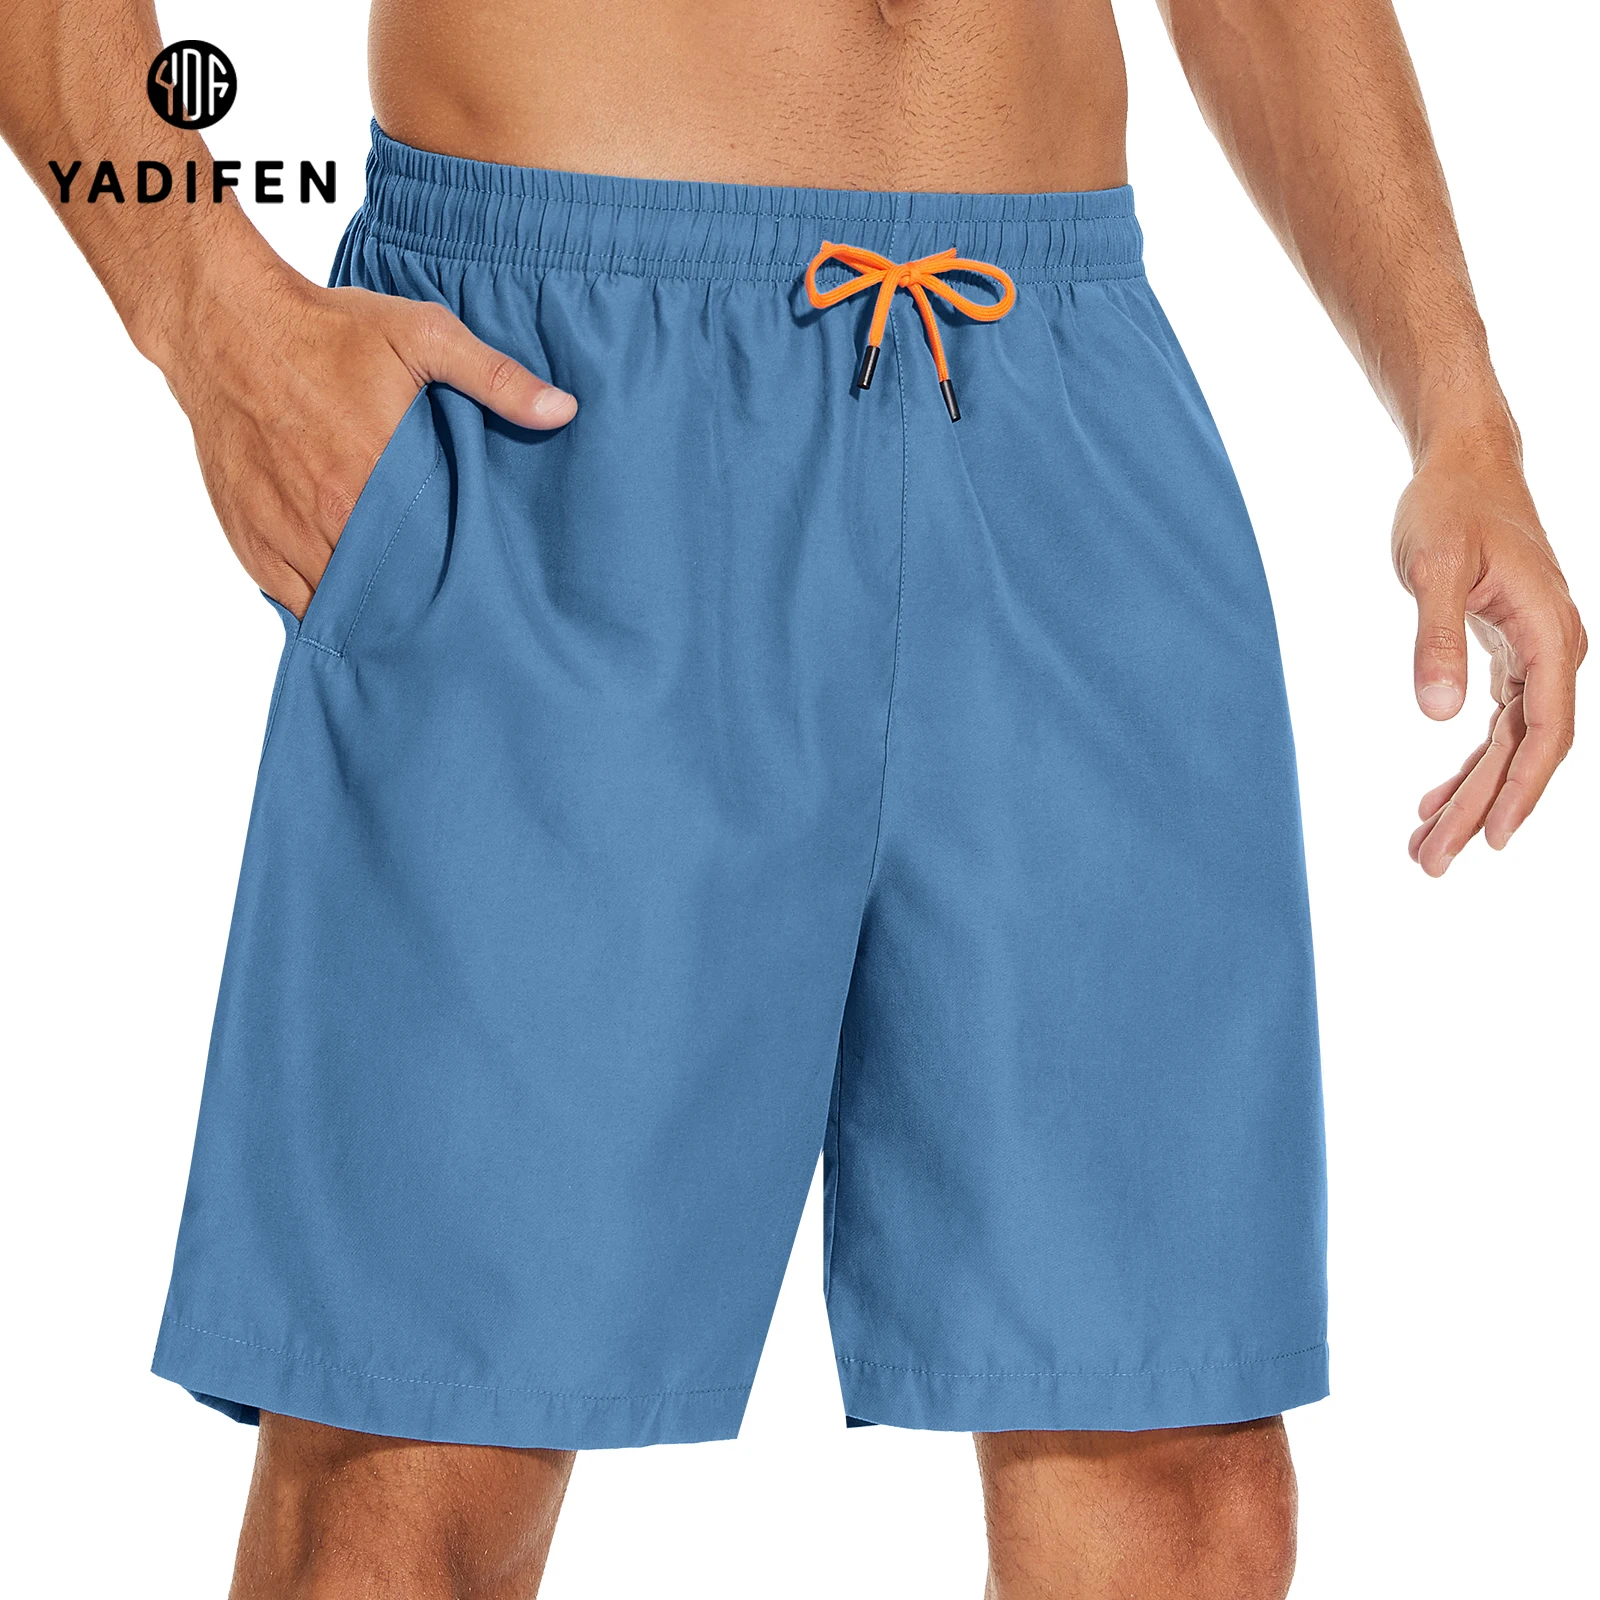 

Men’s Swimming Shorts Swim Trunks Waterproof Quick Dry Beach Shorts Breathable Surfing Boating Shorts with Mesh Liner and Pocket